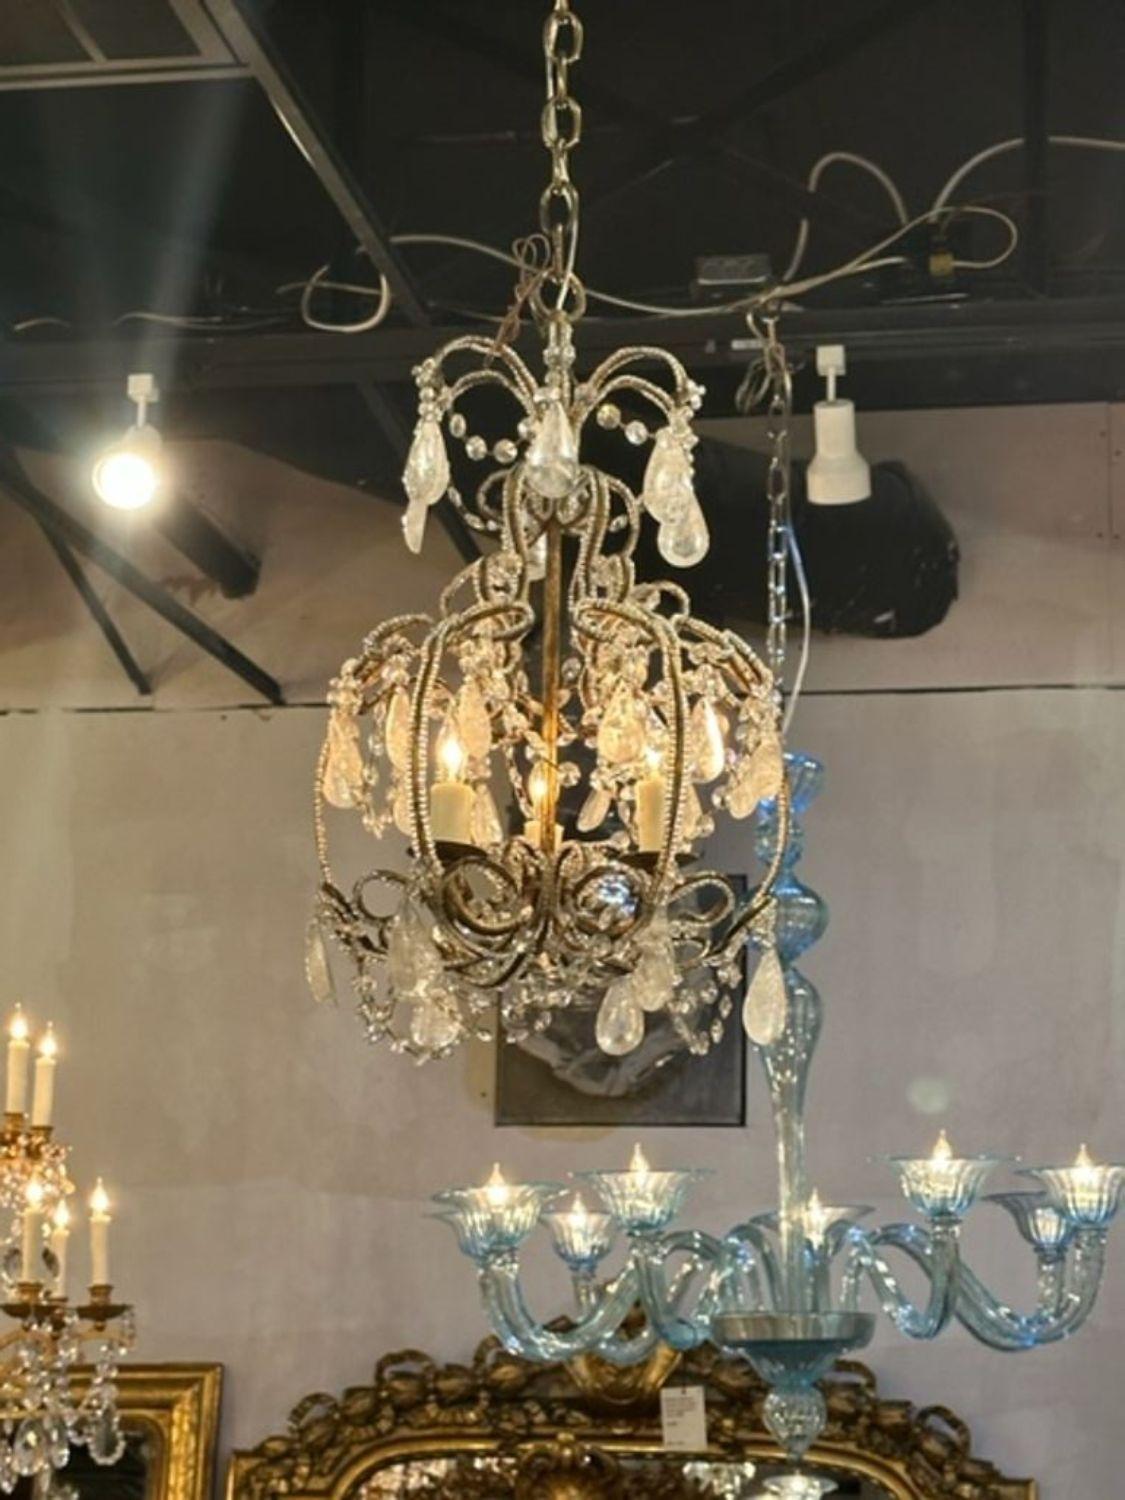 Gorgeous petite vintage beaded and rock crystal 3 light pendant. Adds a real touch of elegance to a small space!